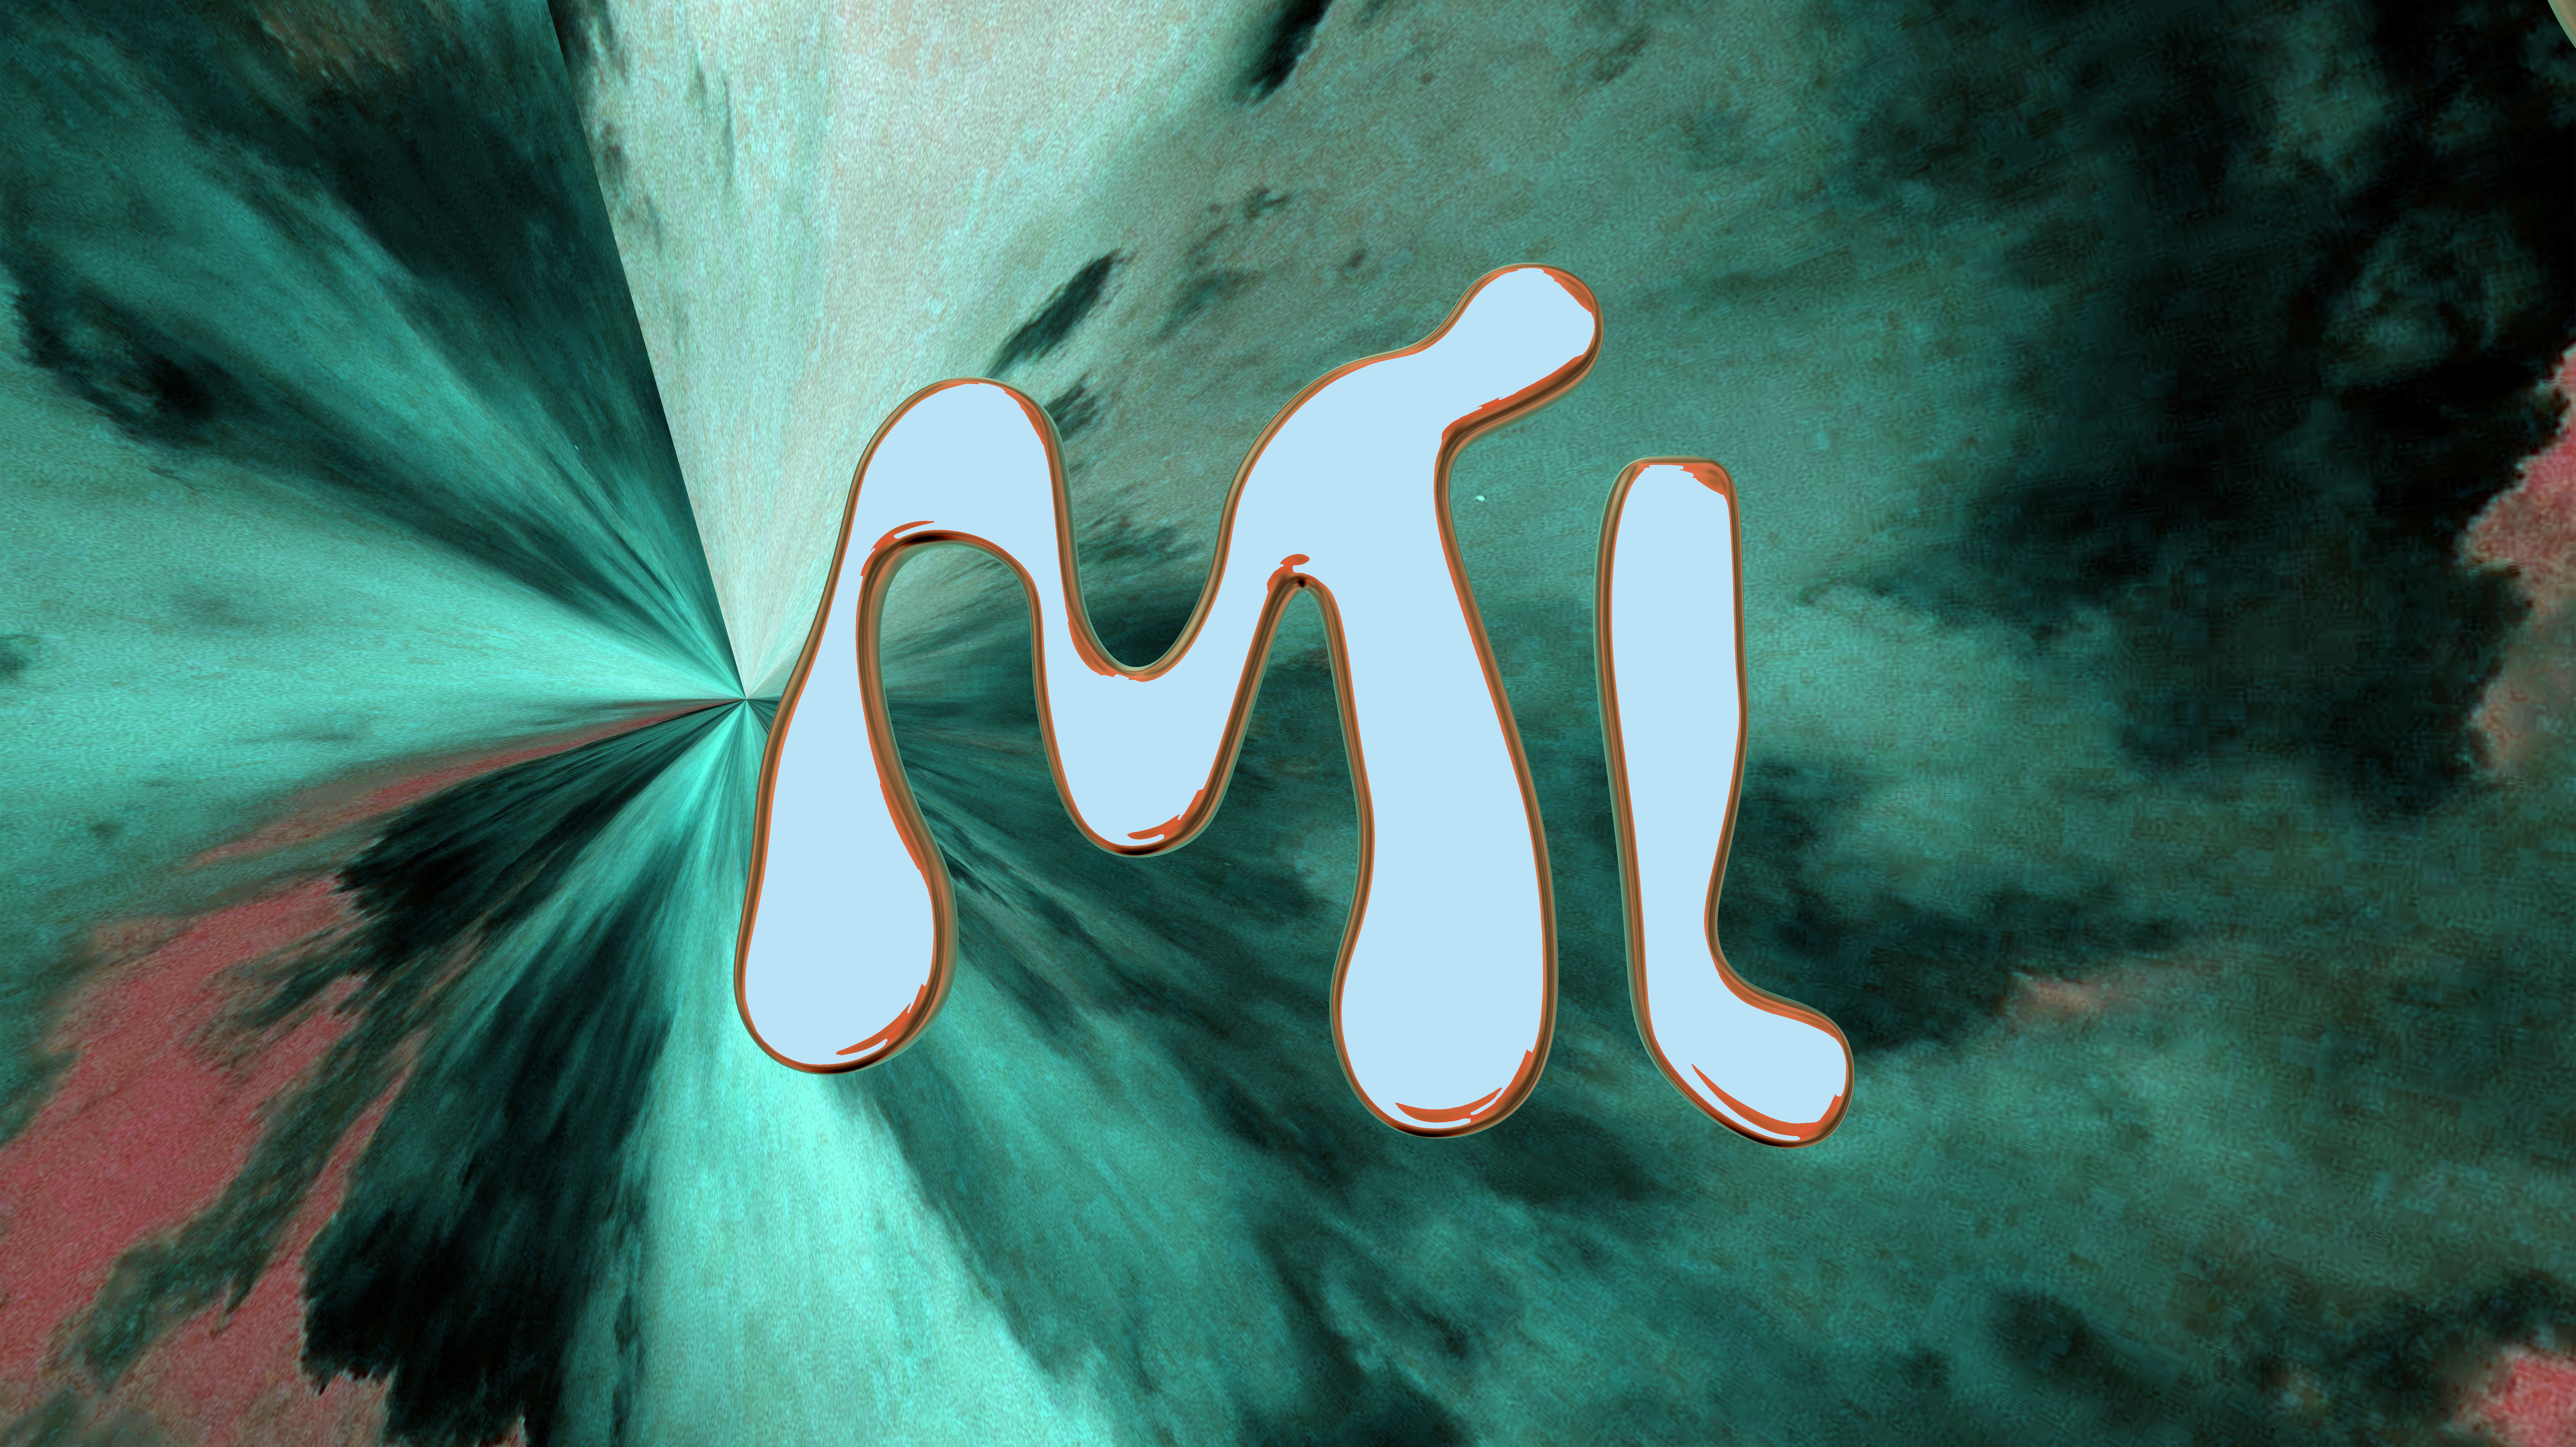 Image of curvy letters M and I in pale blue, outlined in orange, on a swirly green, blue and red background